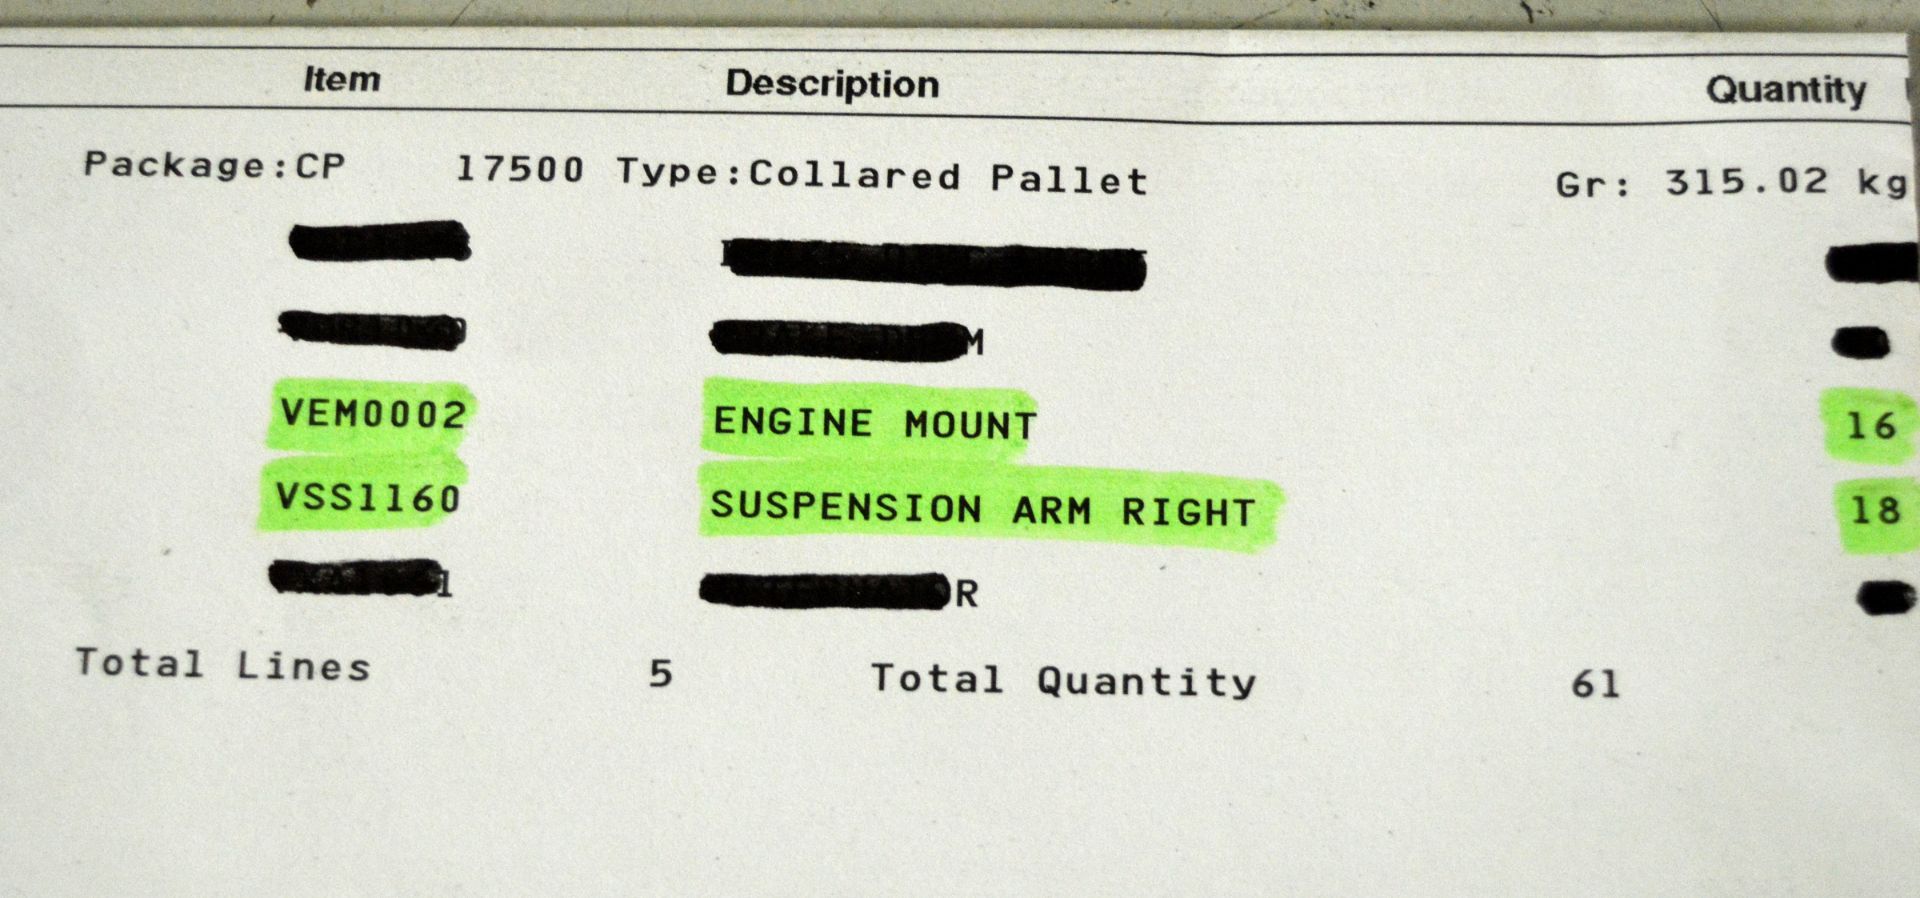 Vehicle parts - engine mounts, suspension arms RH - see picture for itinerary for model nu - Image 5 of 6